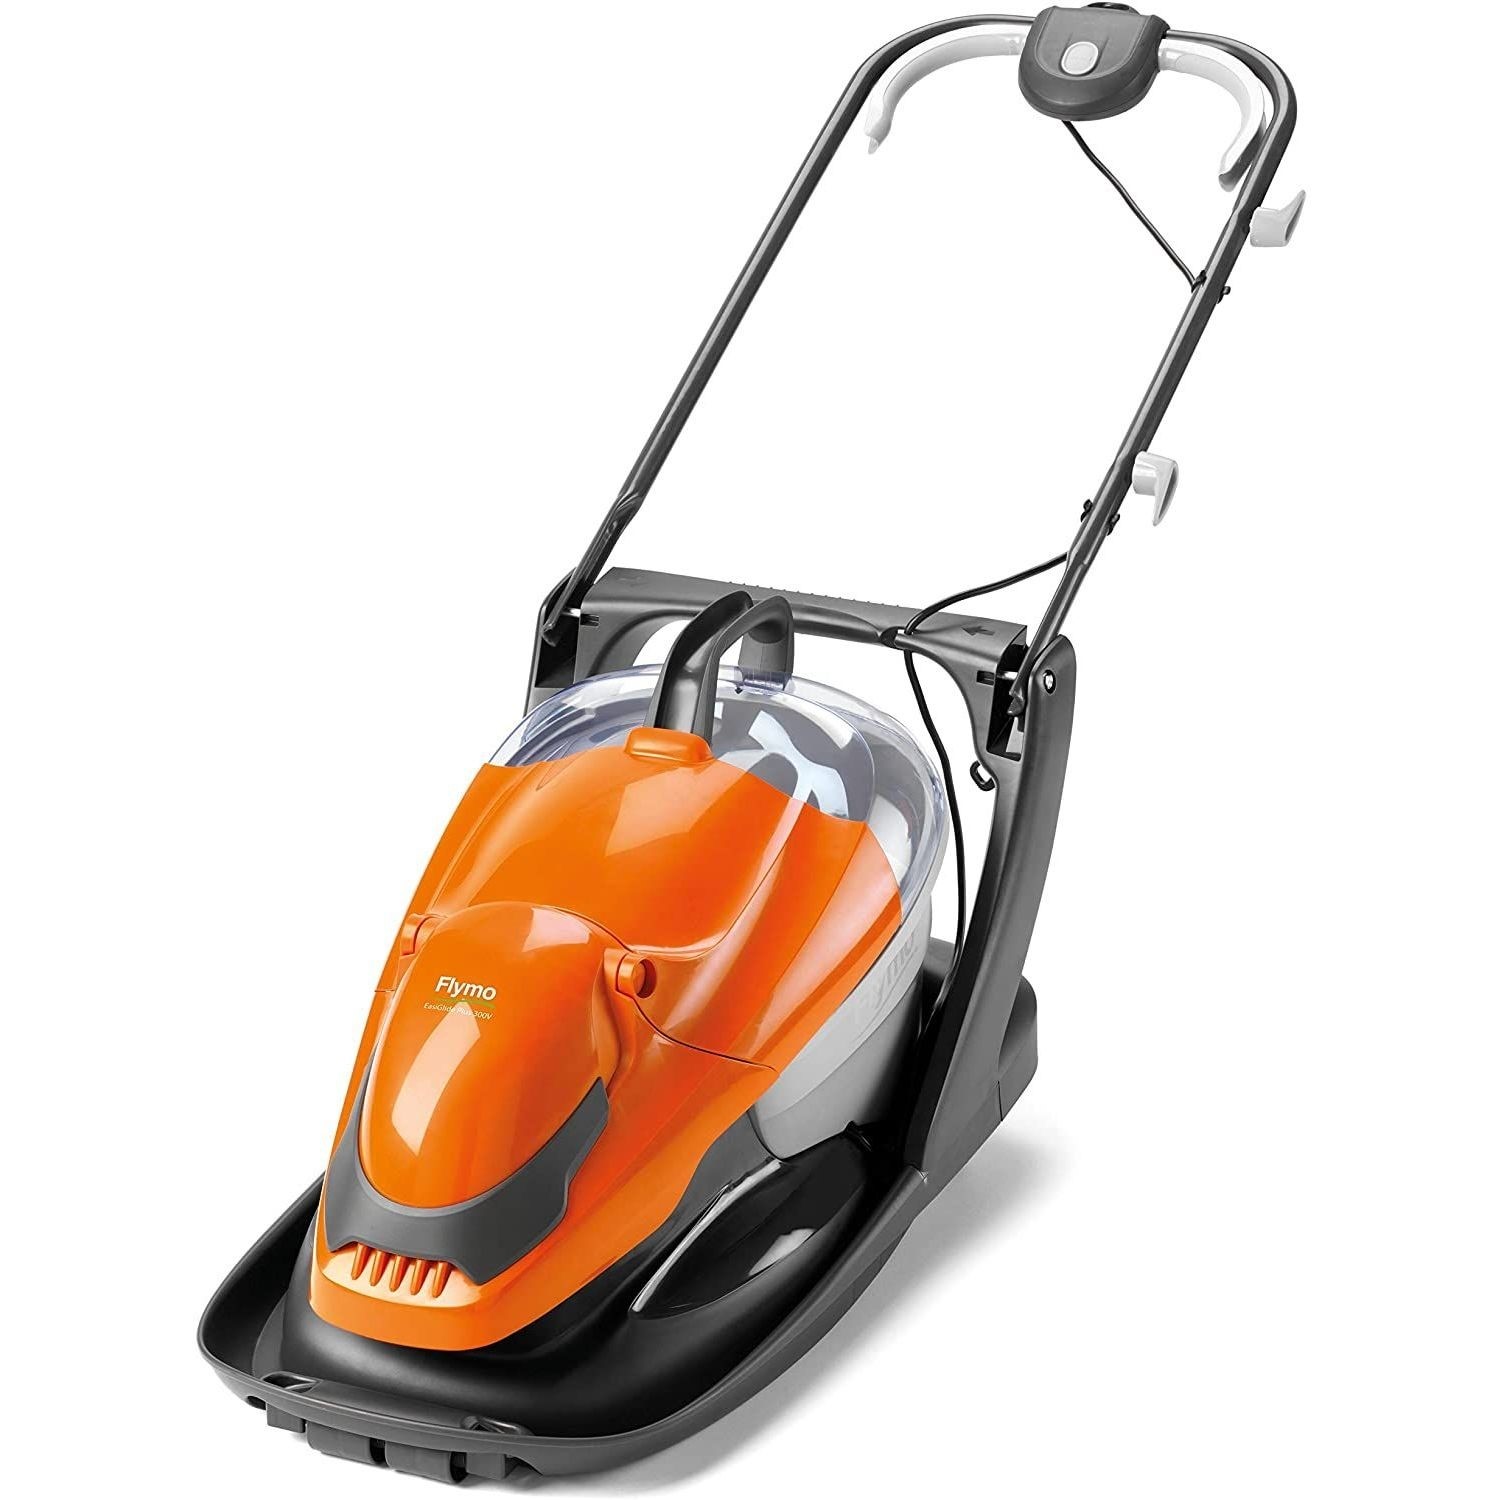 Flymo Easi Glide Plus 300V Electric Hover Collect Lawn Mower